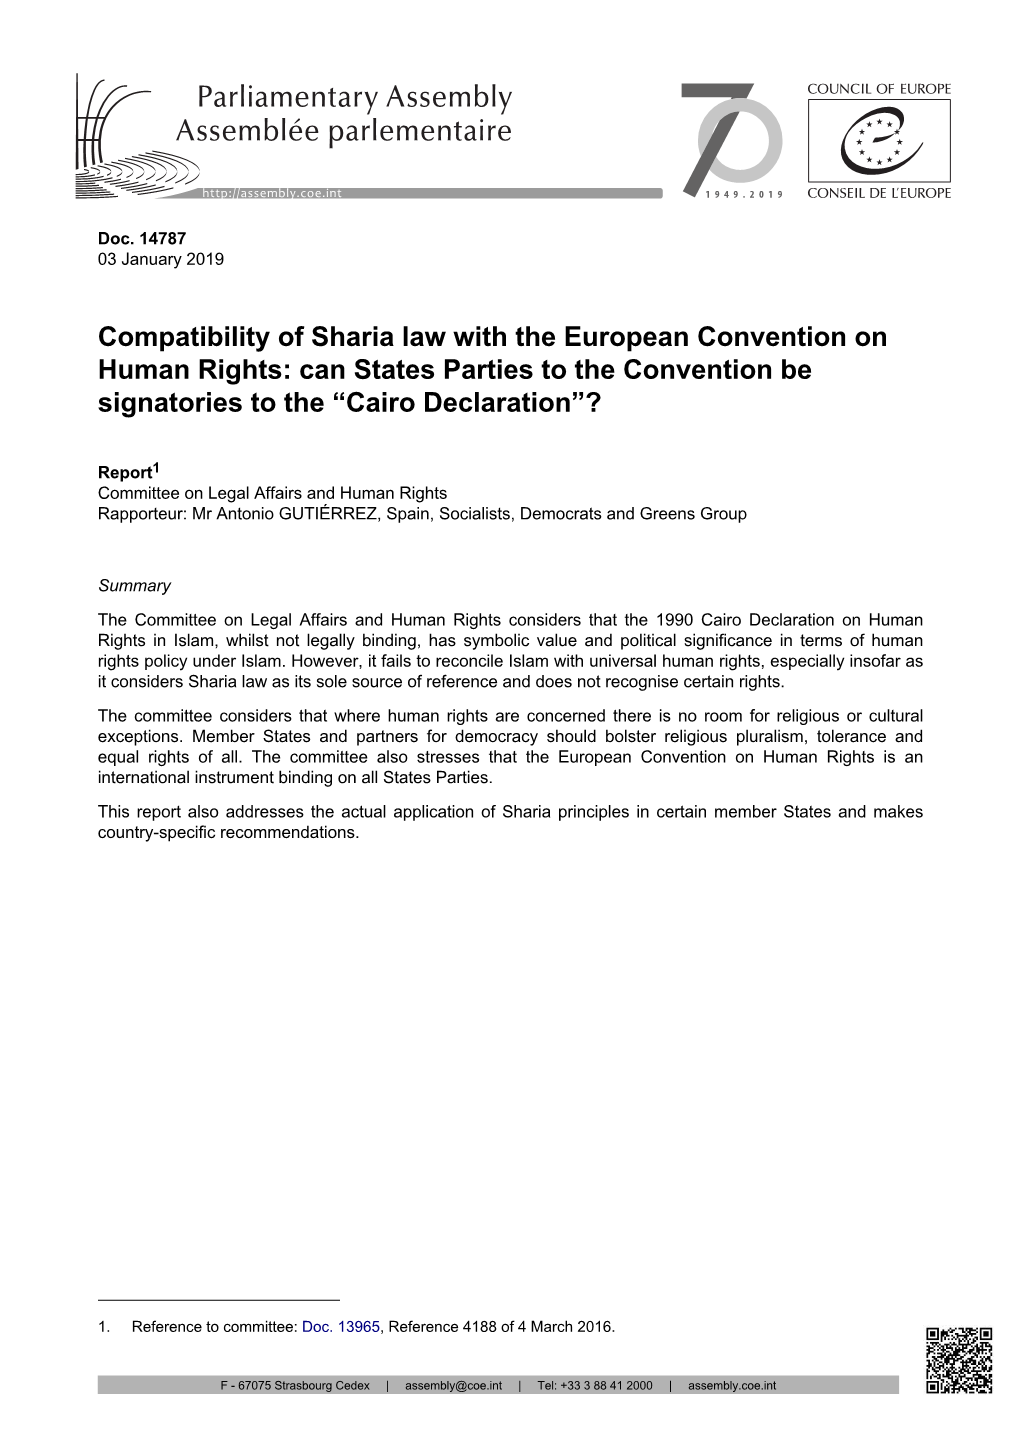 Compatibility of Sharia Law with the European Convention on Human Rights: Can States Parties to the Convention Be Signatories to the “Cairo Declaration”?